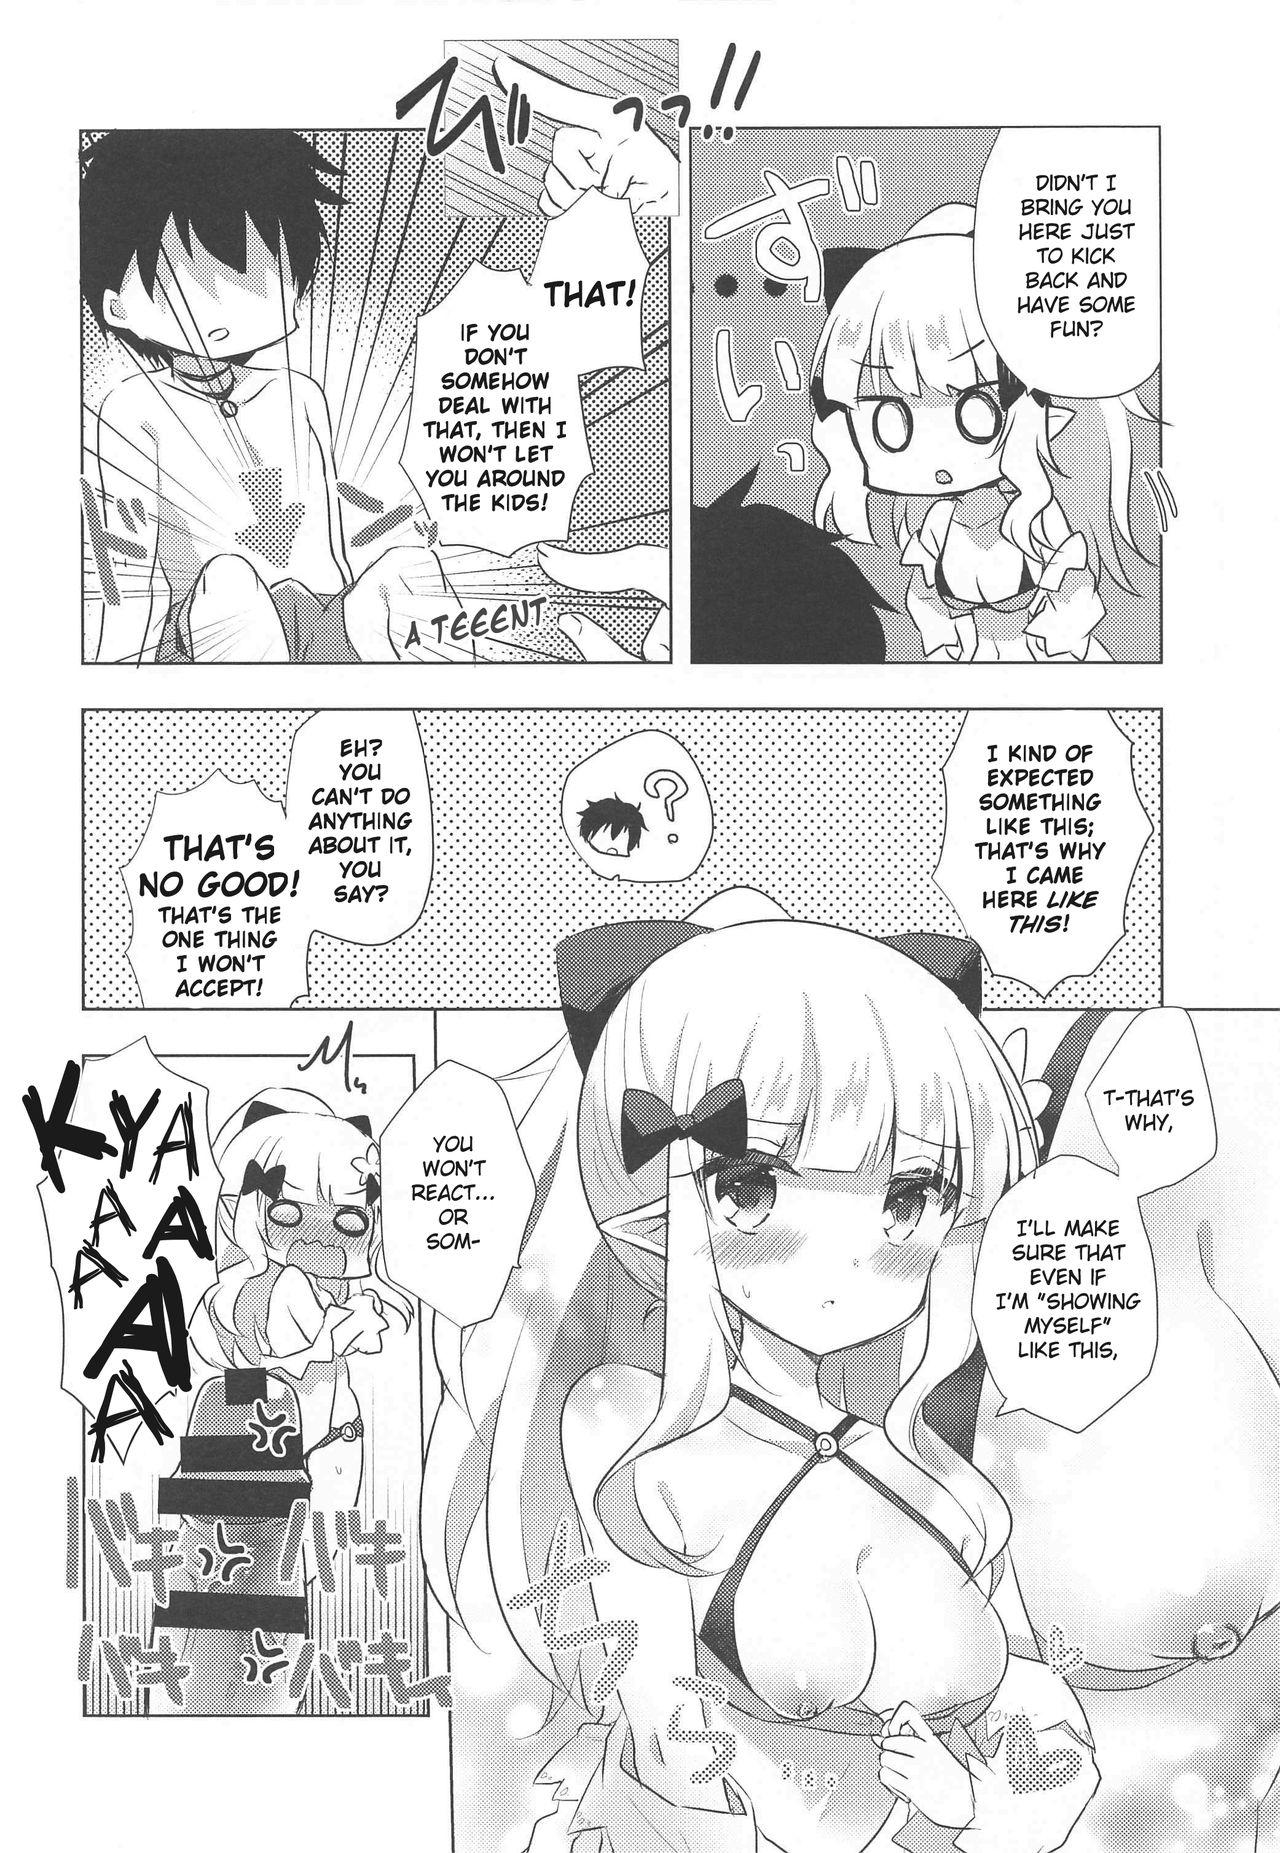 Old And Young PriConne Konekone Re:Dive! 6.5 - Princess connect Interacial - Page 5